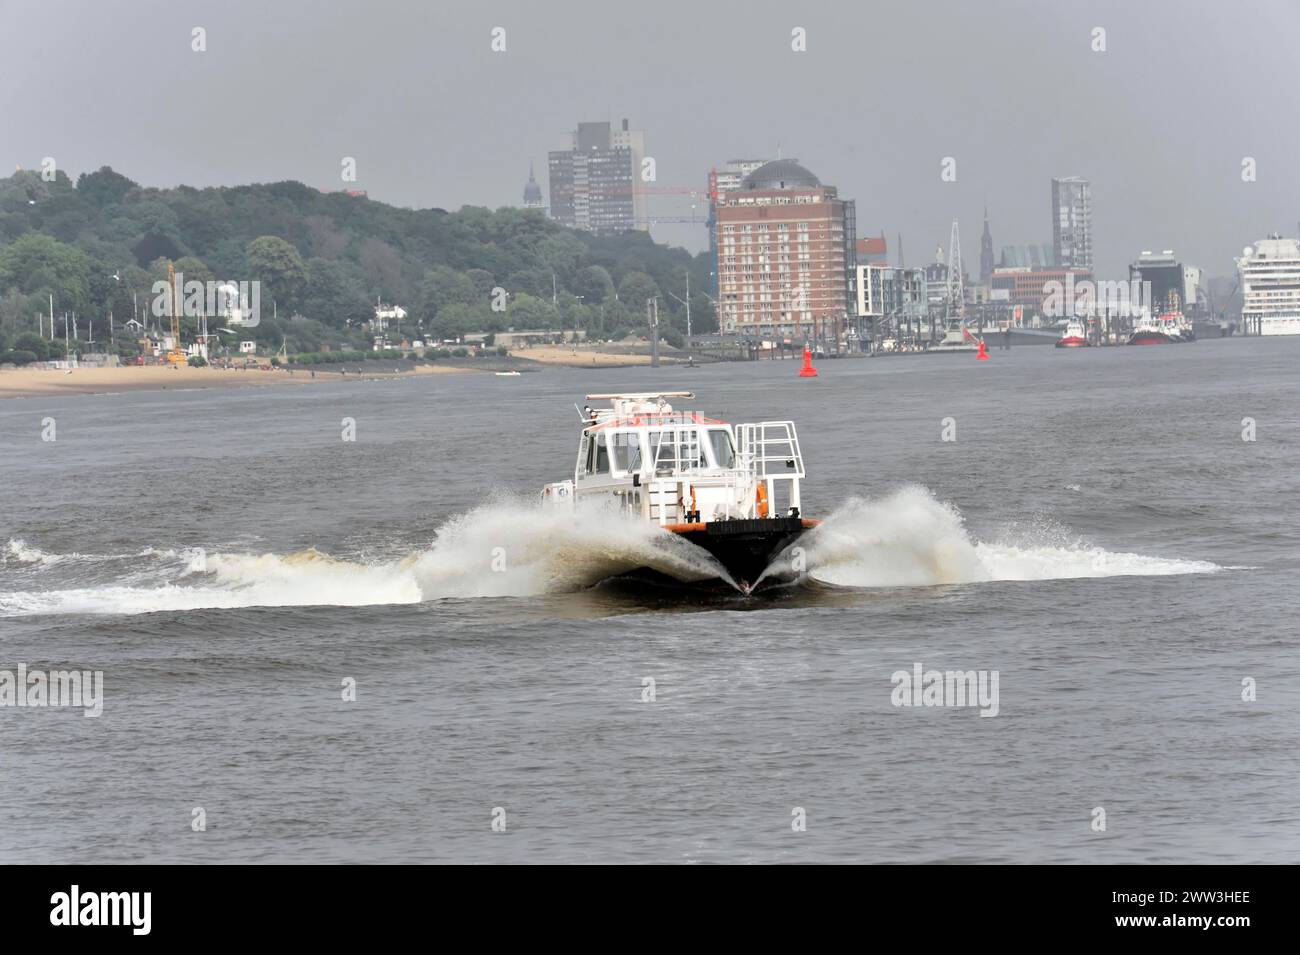 A speedboat cruises quickly through the harbour water and leaves waves in its wake, Hamburg, Hanseatic City of Hamburg, Germany Stock Photo